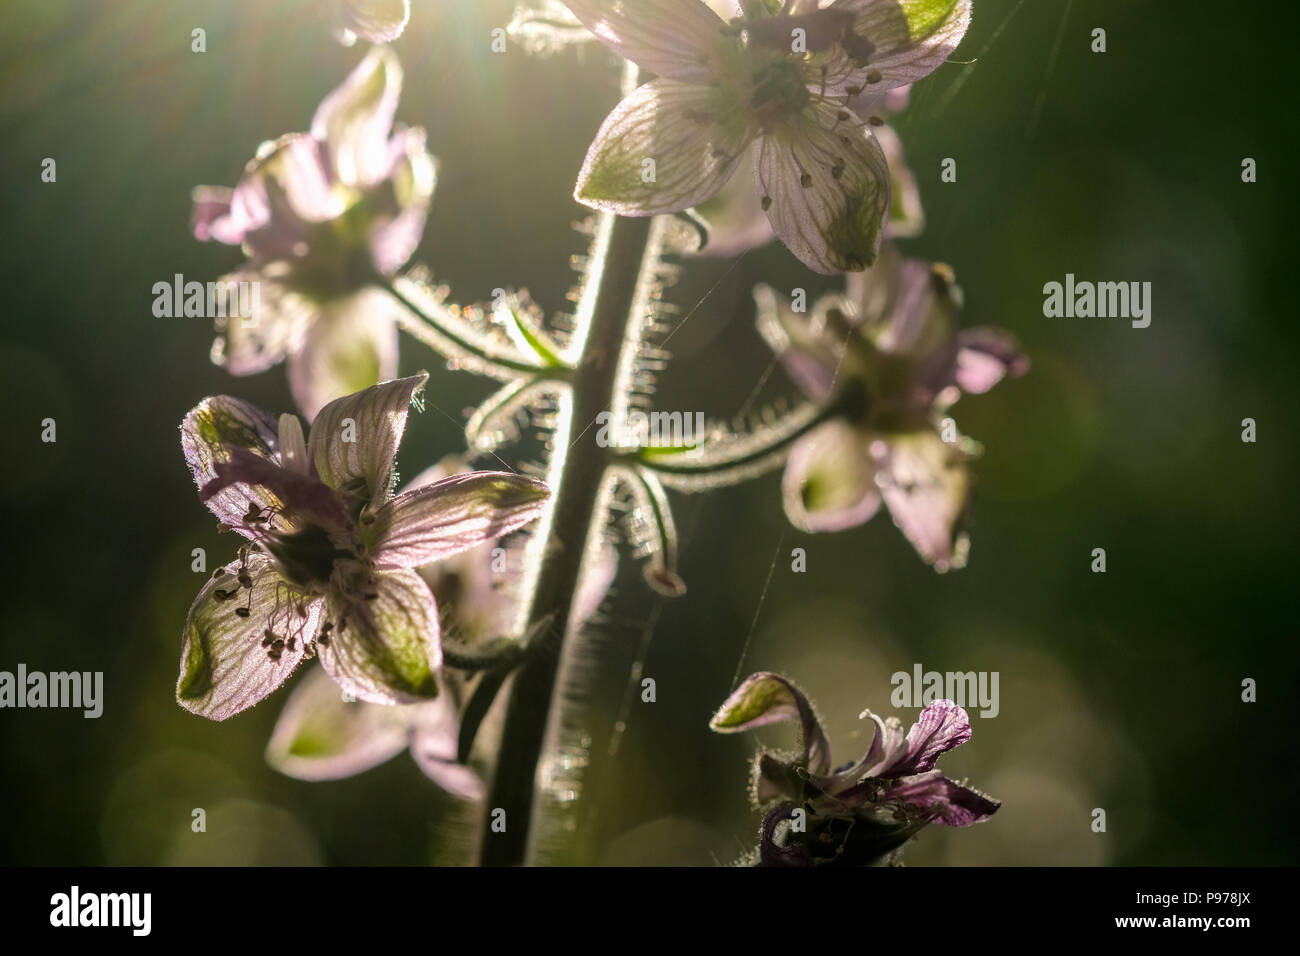 Selcuk, Turkey. 18th May, 2018. A flower of the Stephanskraut (Delphinium staphisagria) Larkspur in the back light. The plant produces many alkaloids. Credit: Jens Kalaene/dpa-Zentralbild/dpa/Alamy Live News Stock Photo